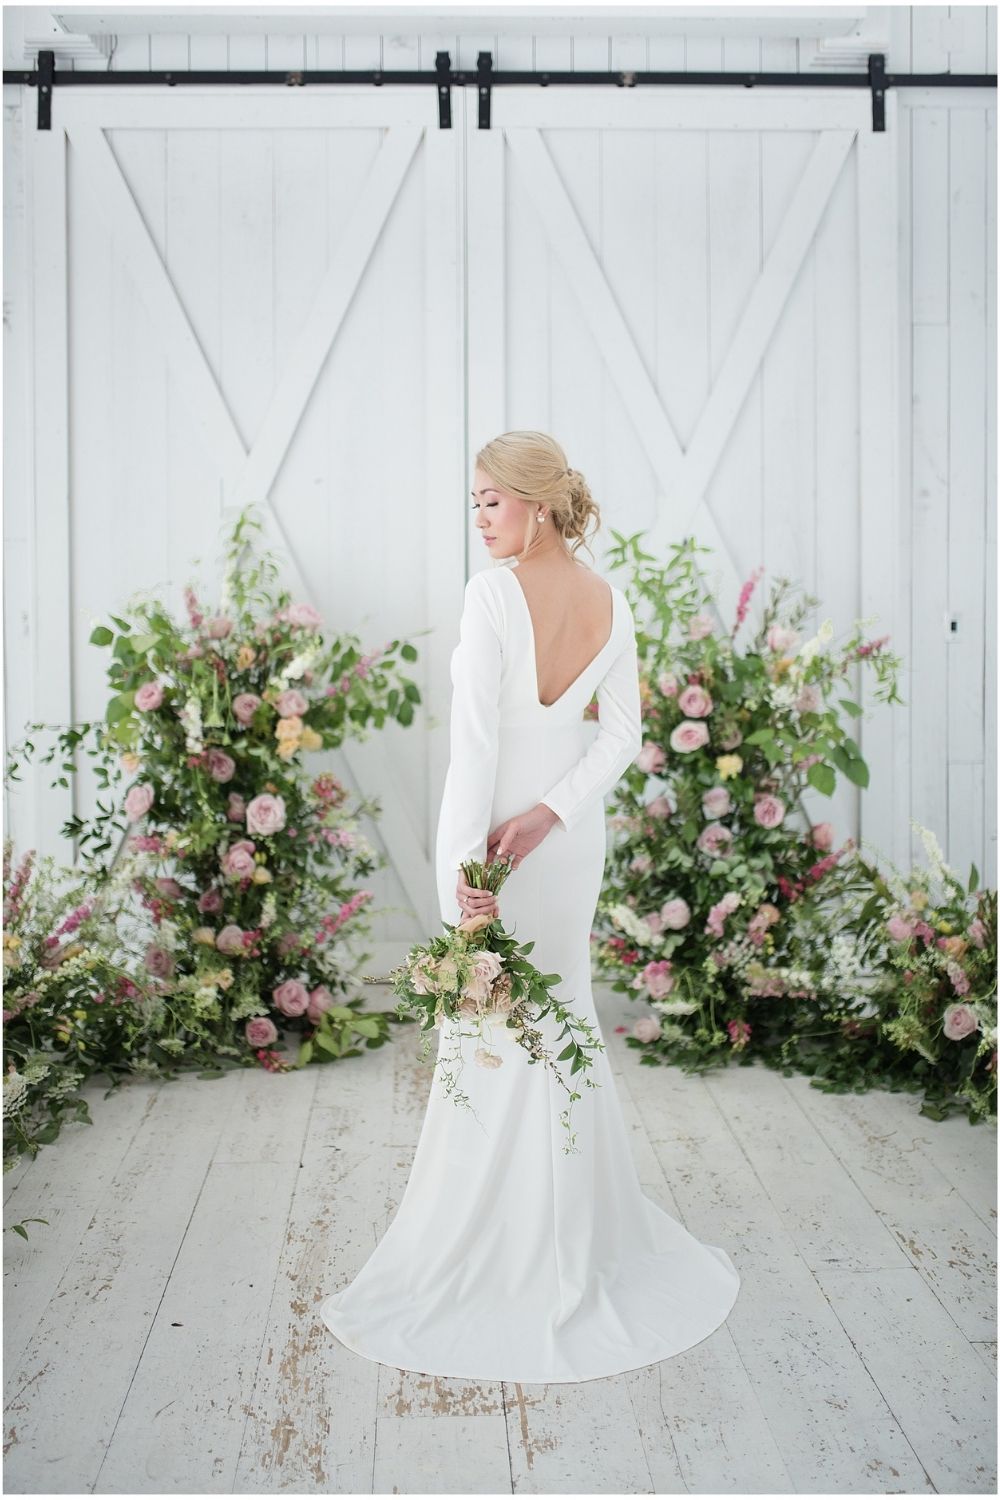 Bride in a white trumpet wedding dress with long sleeves, low back and pink bouquet